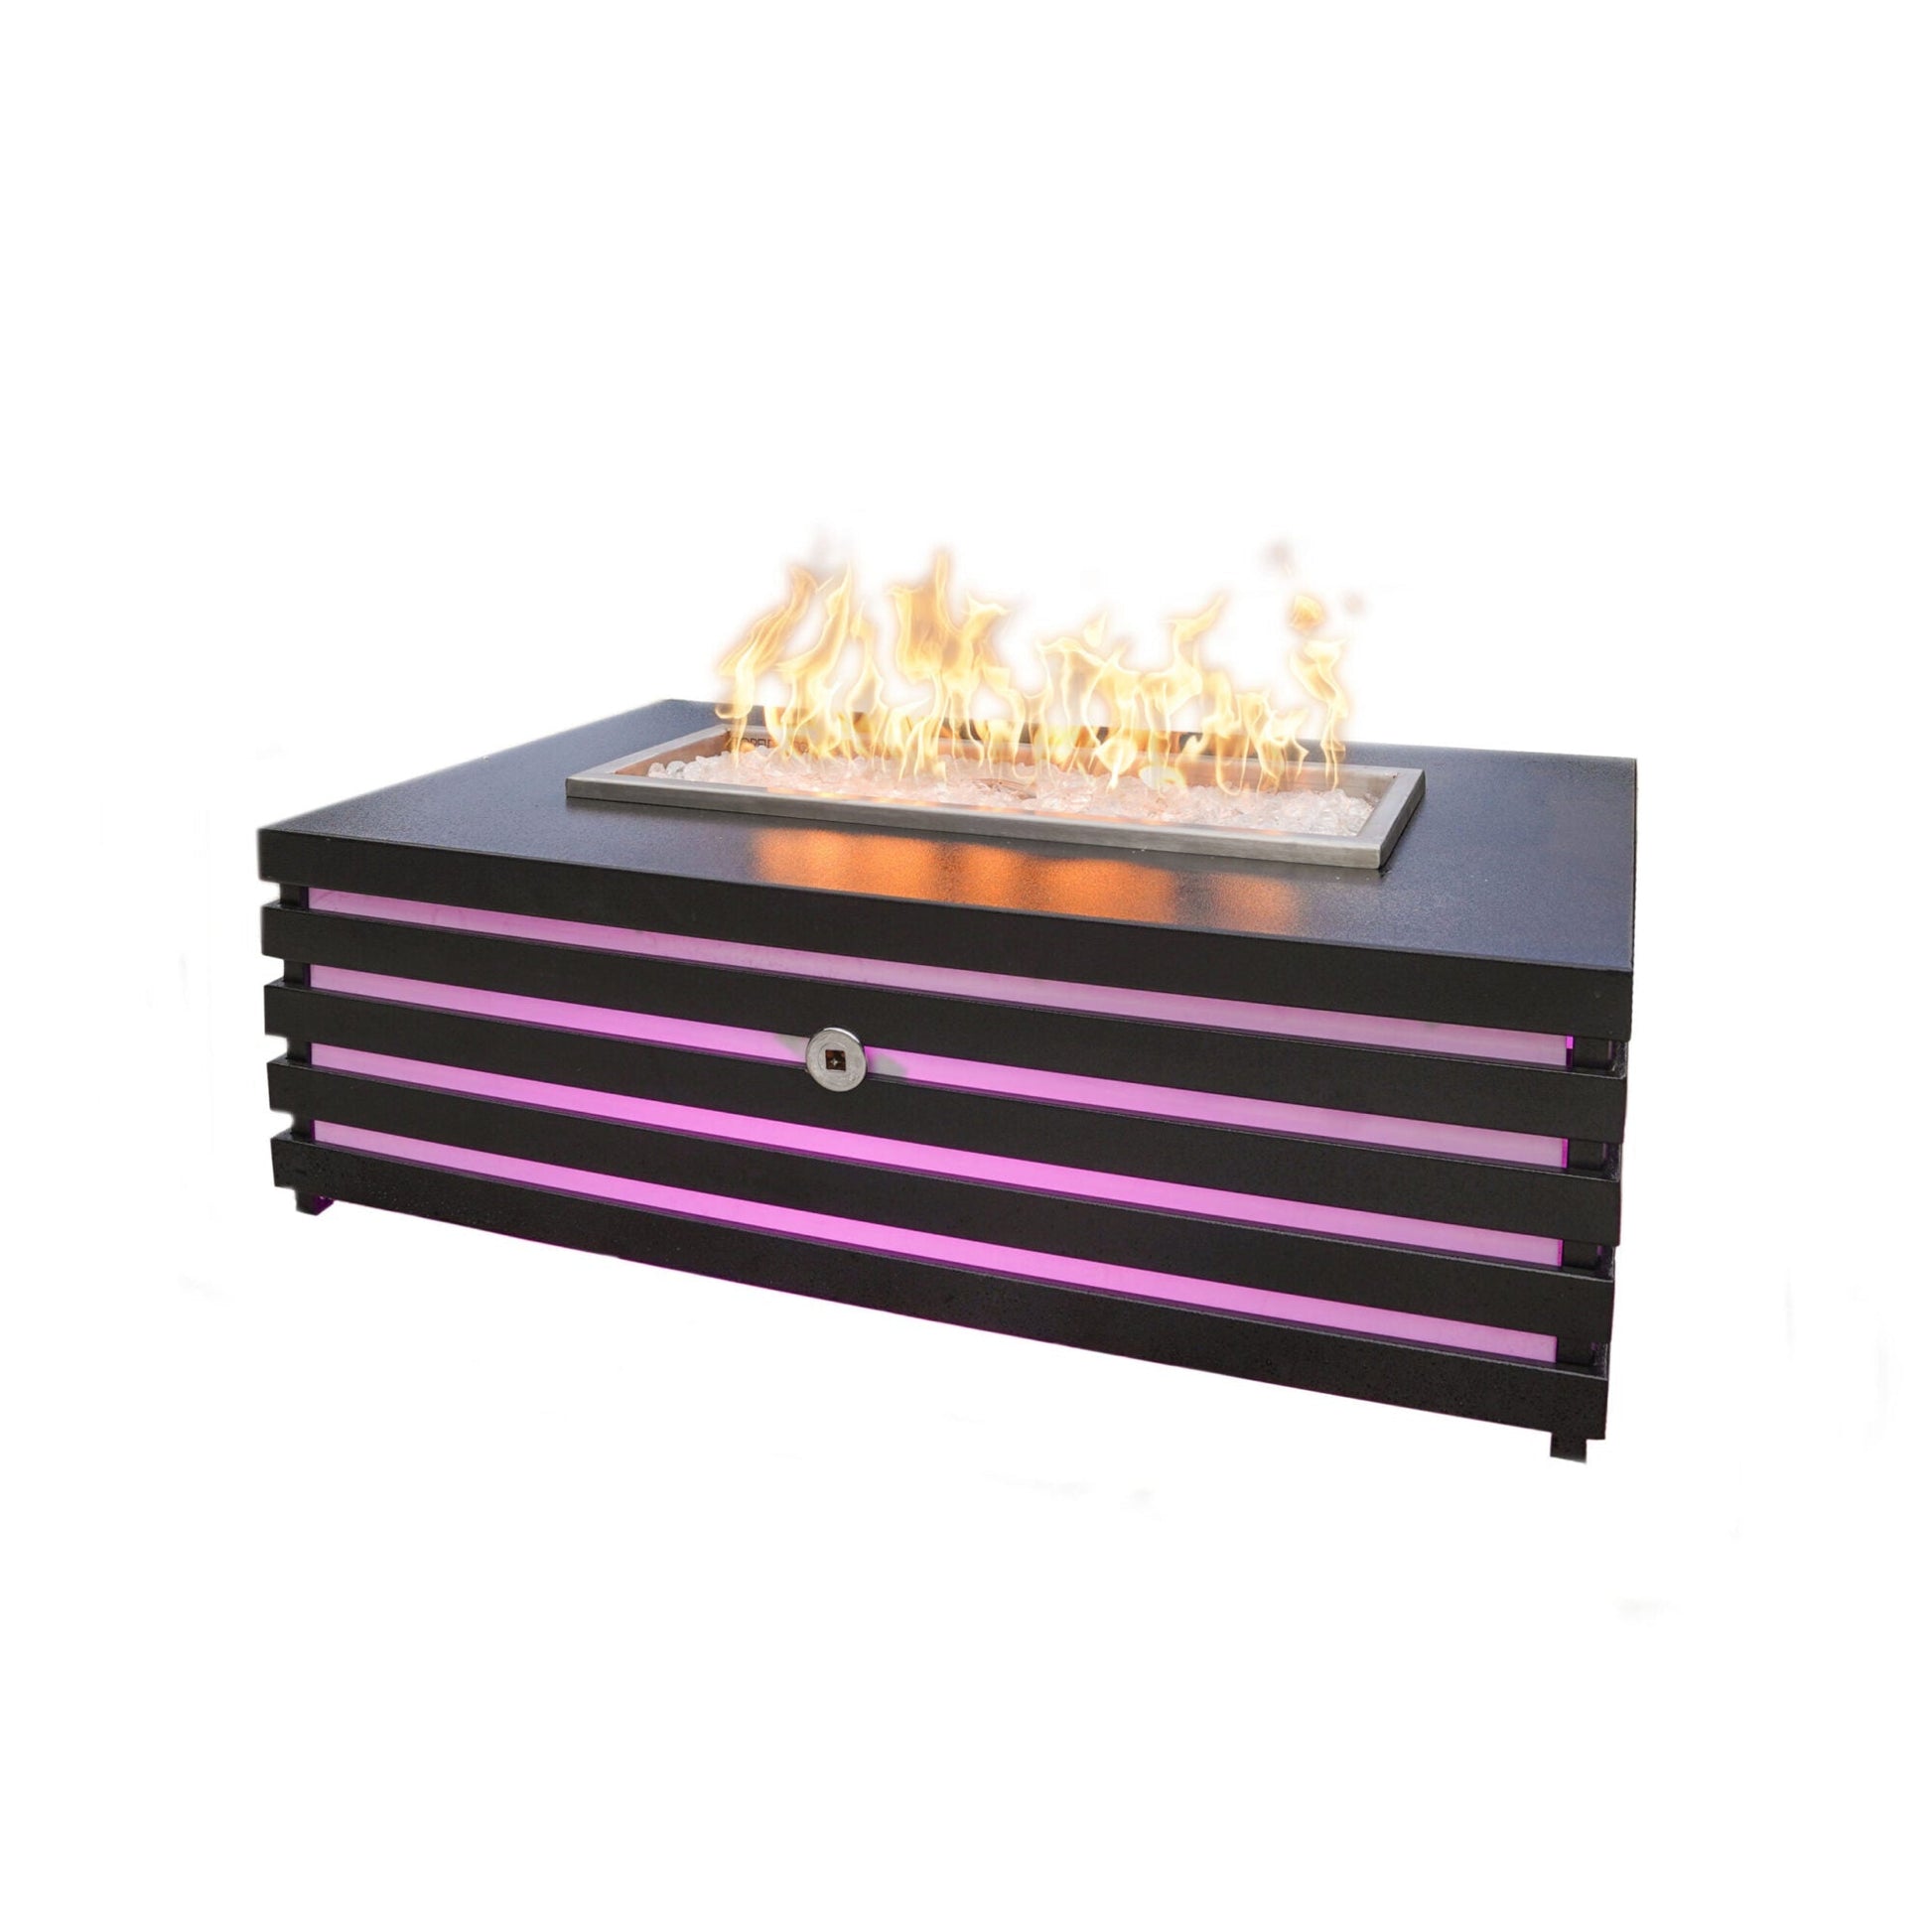 The Outdoor Plus Amina 48" Java Powder Coated Liquid Propane Fire Pit with 110V Electronic Ignition